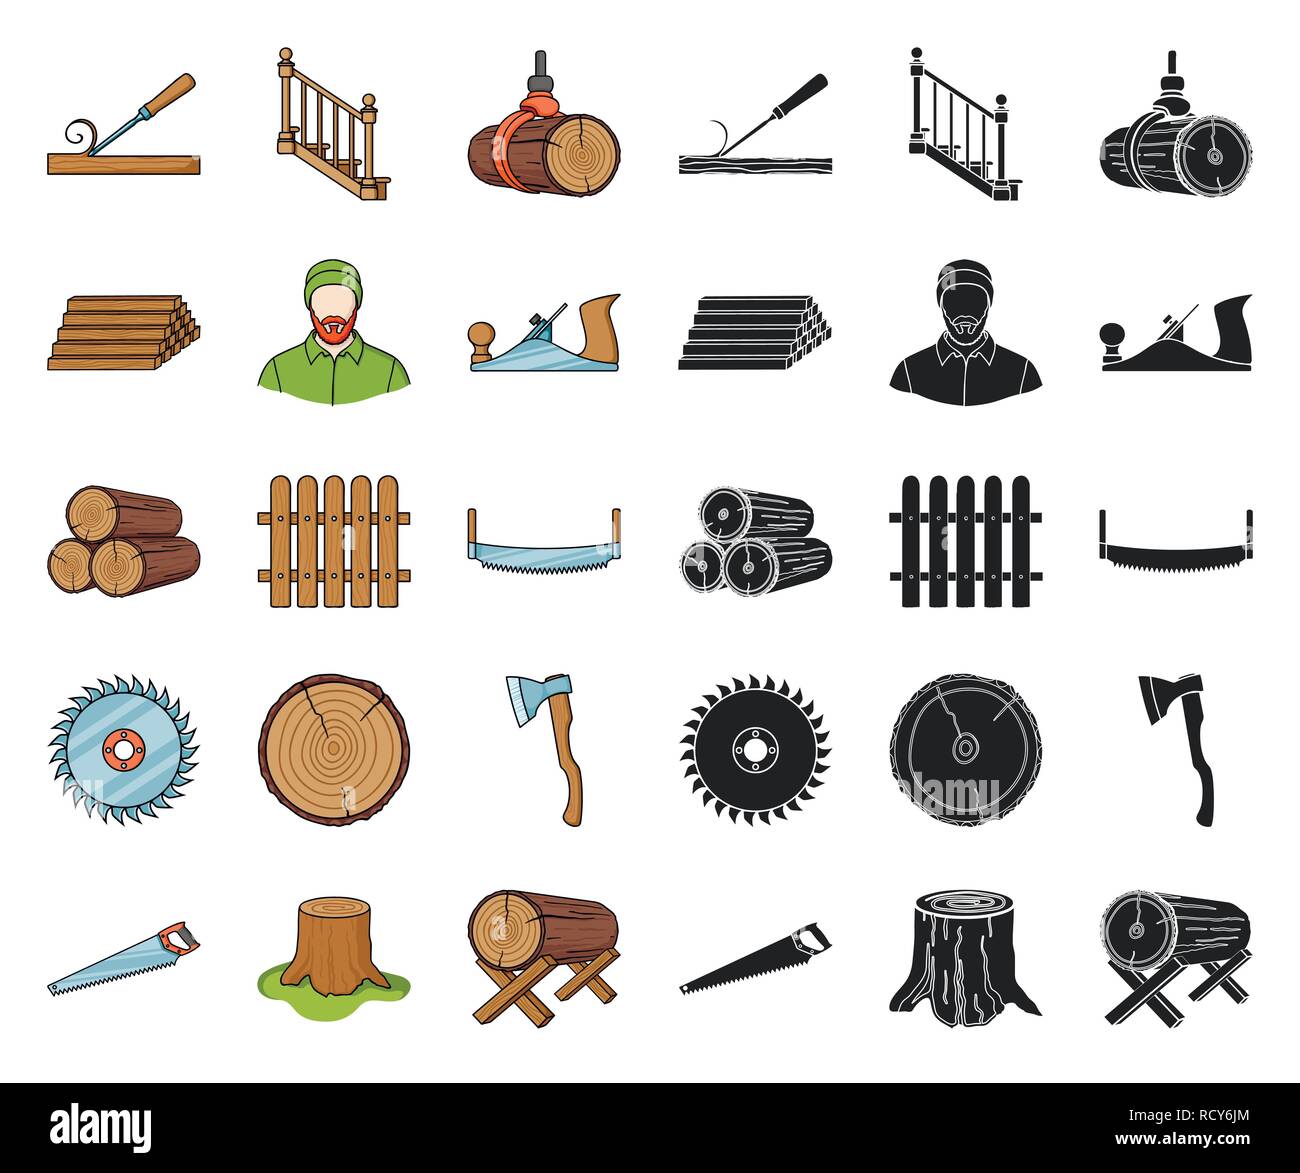 art,axe,cartoon,black,chisel,collection,crane,cross,design,disc,equipment,falling,fence,goats,hand,hydraulic,icon,illustration,isolated,jack,logo,logs,lumber,lumbers,lumbrejack,plane,processing,product,production,saw,sawing,sawmill,section,set,sign,stack,stairs,stump,symbol,timber,tools,tree,two-man,vector,web Vector Vectors , Stock Vector